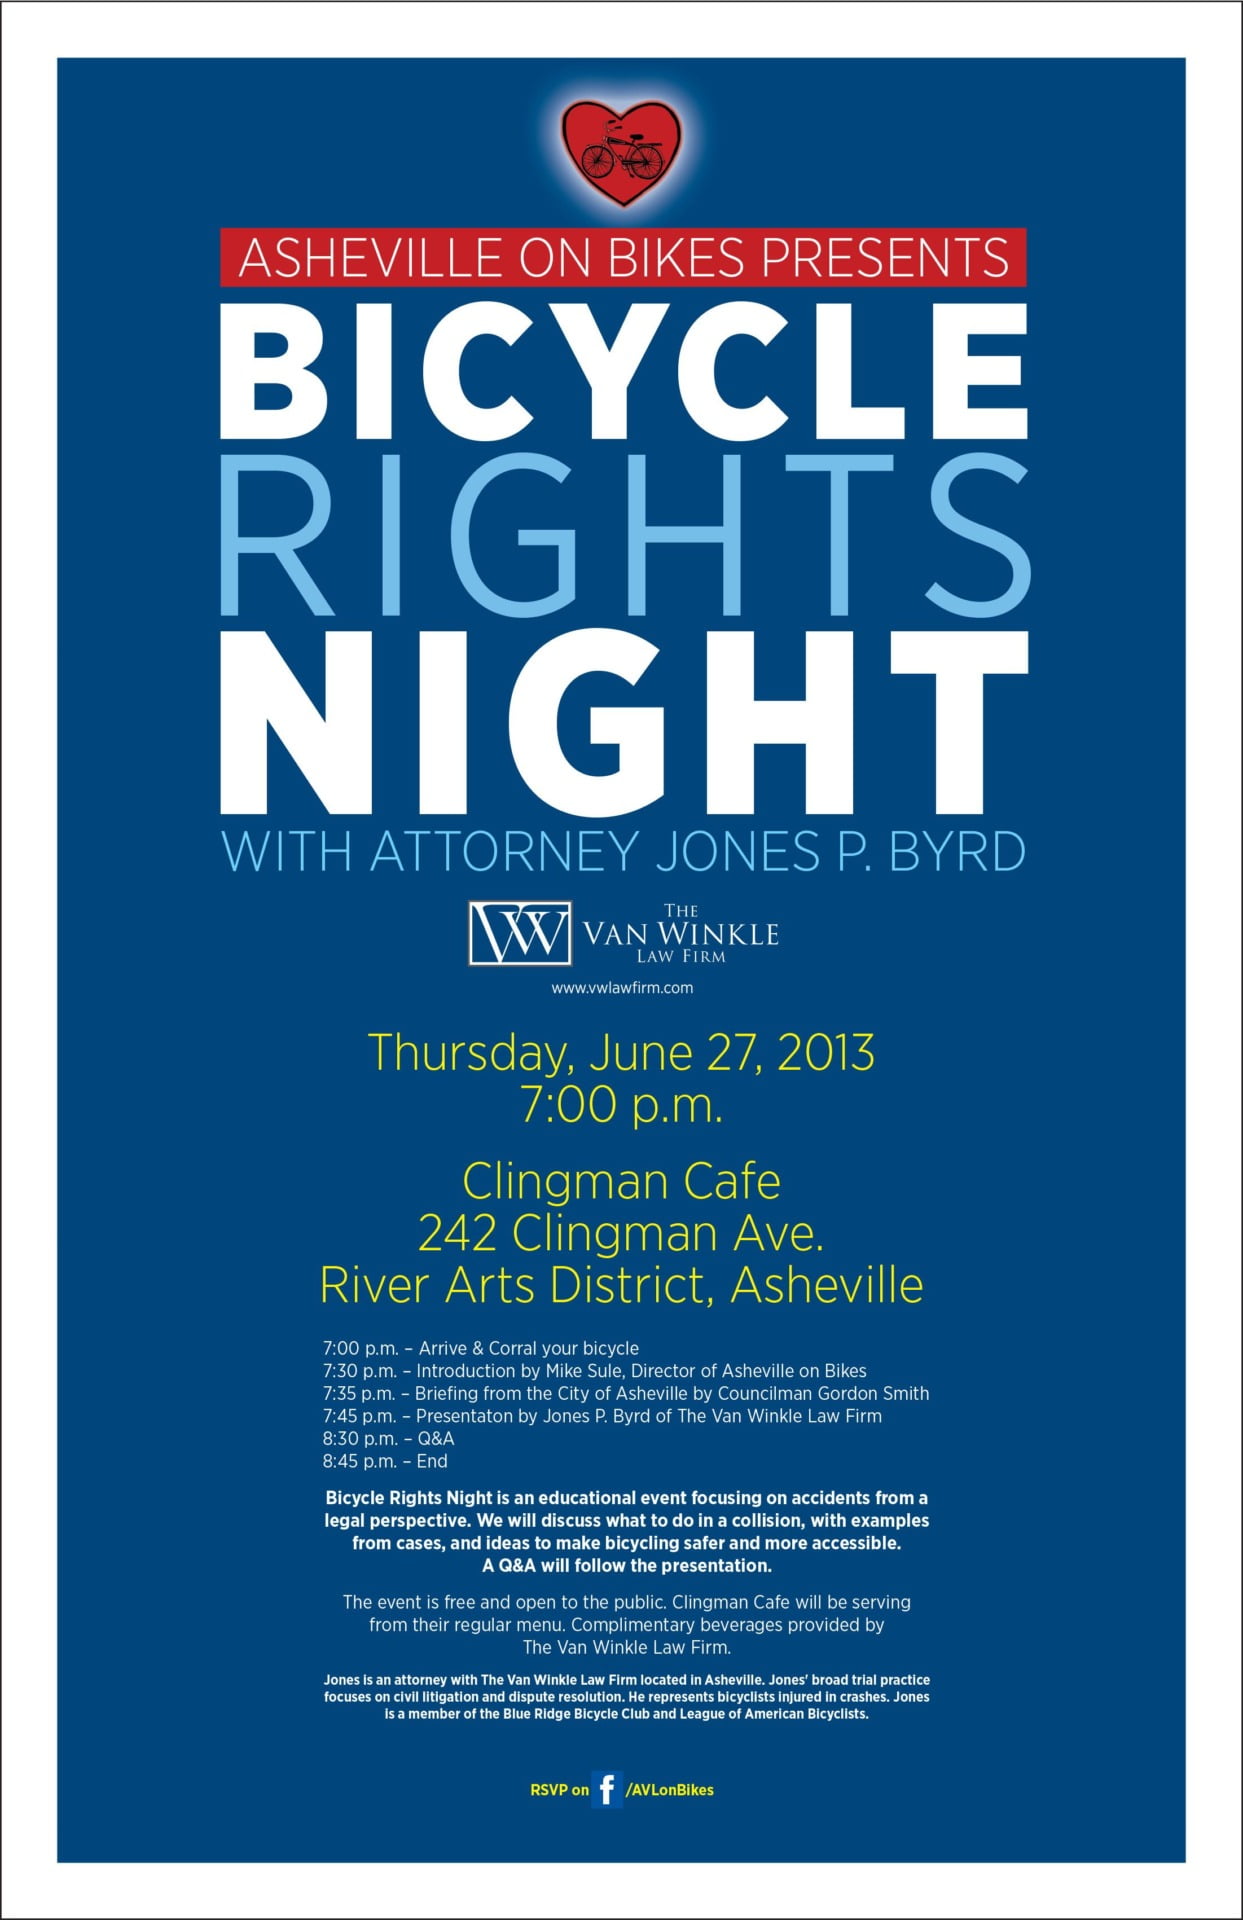 Bicycle Rights Night poster